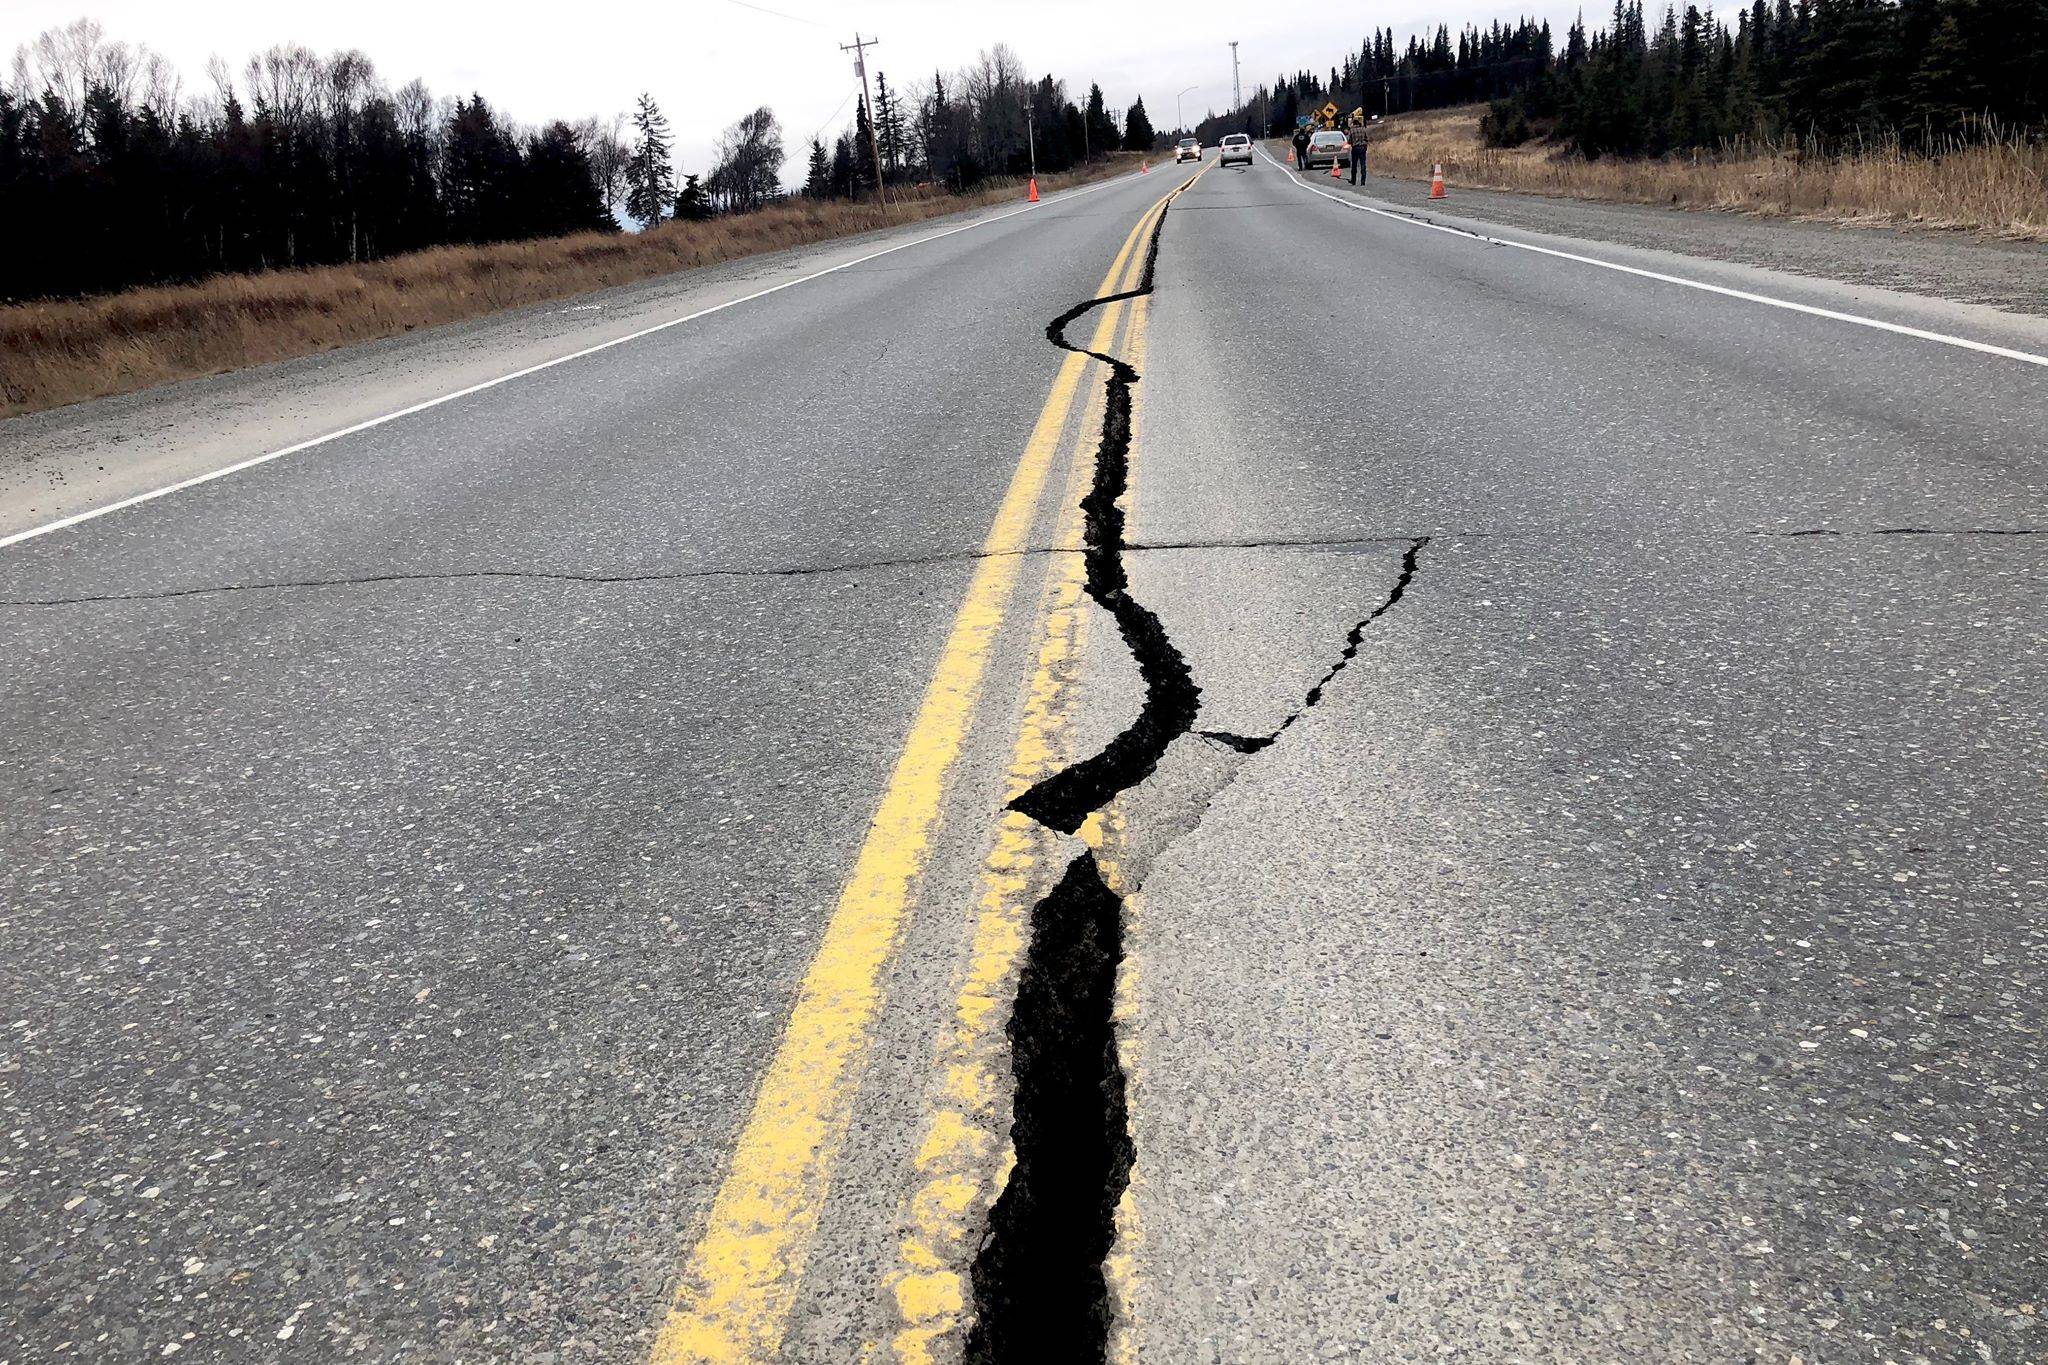 The road at Mile 19 of the Kenai Spur Highway near Nikiski cracked down the middle after the Friday, Nov. 30, 2018 earthquake near Anchorage, Alaska. (Photo by Victoria Petersen/Peninsula Clarion)